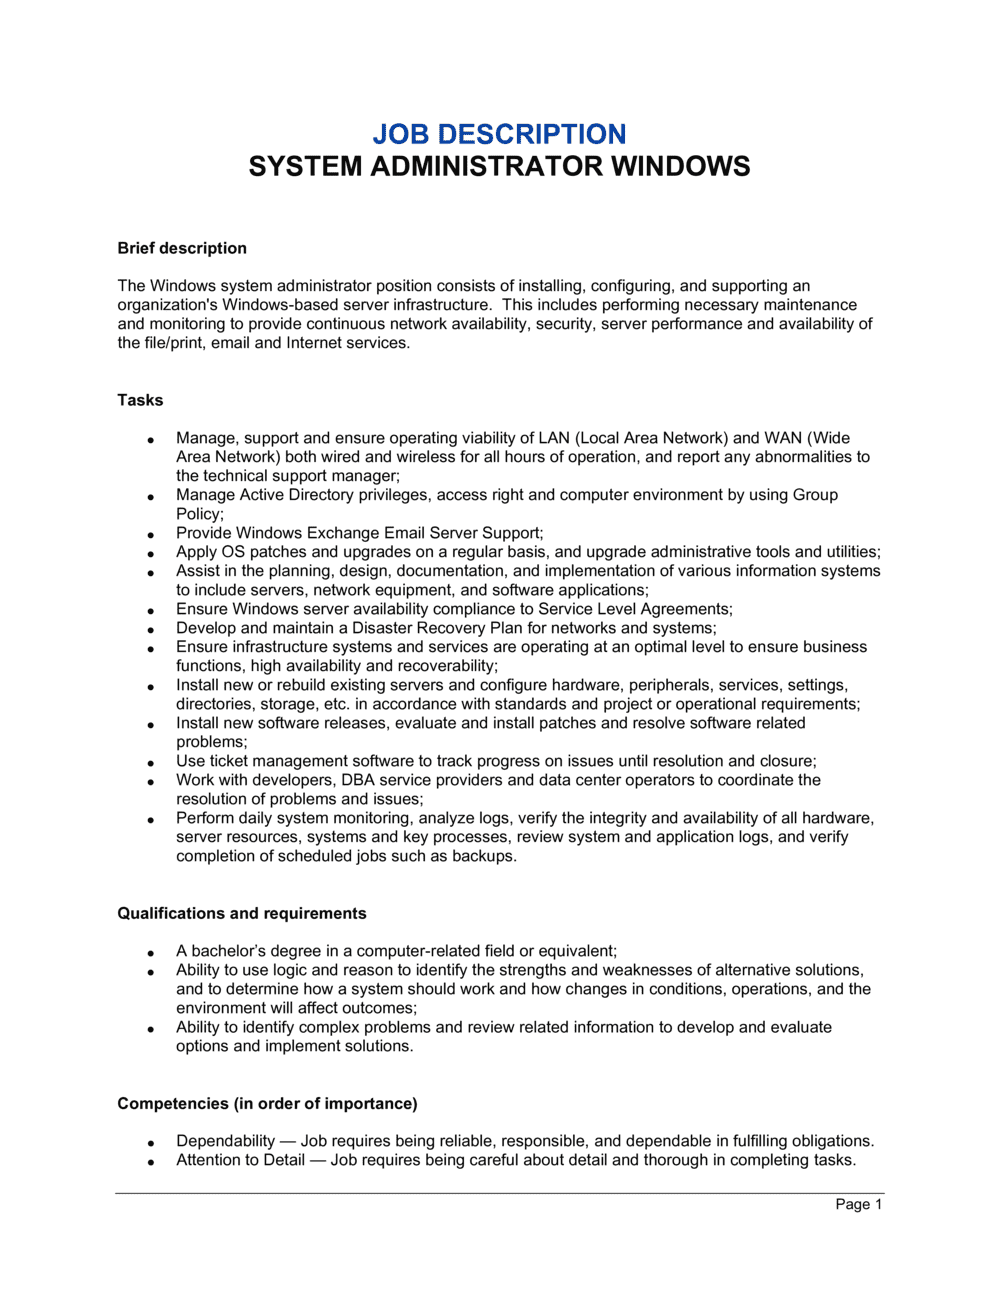 System Administrator Windows Job Description Template | By Business-In-A-Box™